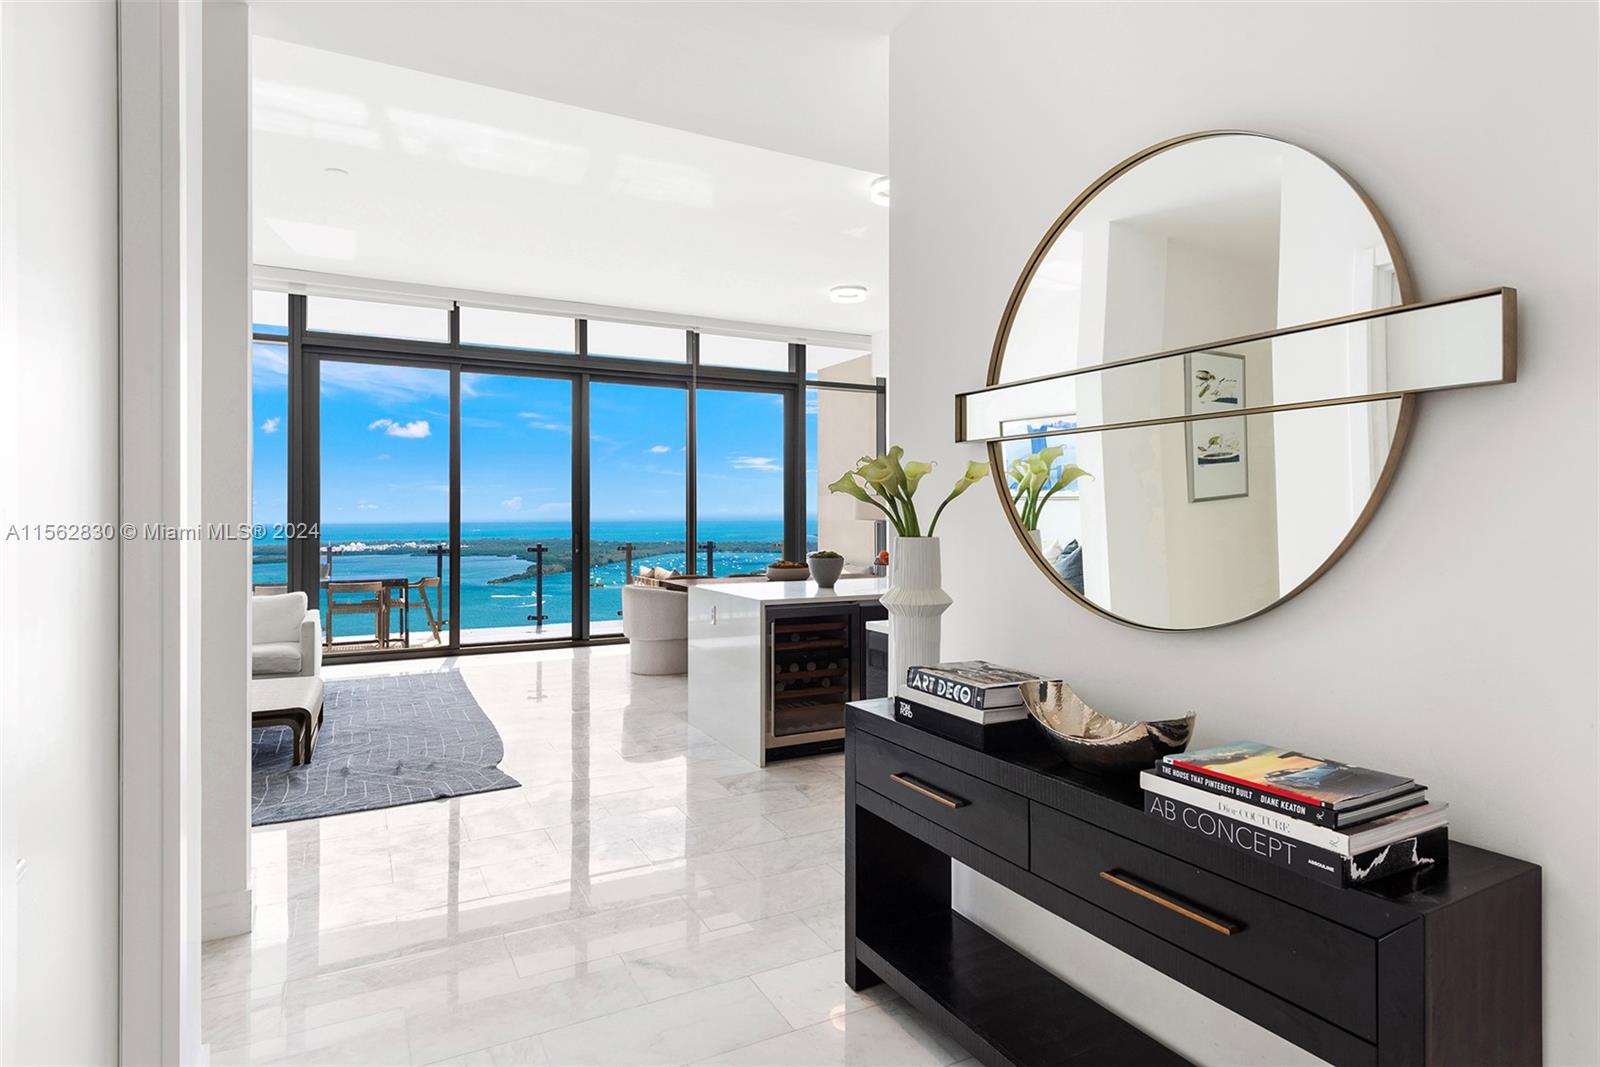 Property for Sale at 1451 Brickell Ave Lph 5201, Miami, Broward County, Florida - Bedrooms: 3 
Bathrooms: 4  - $4,500,000